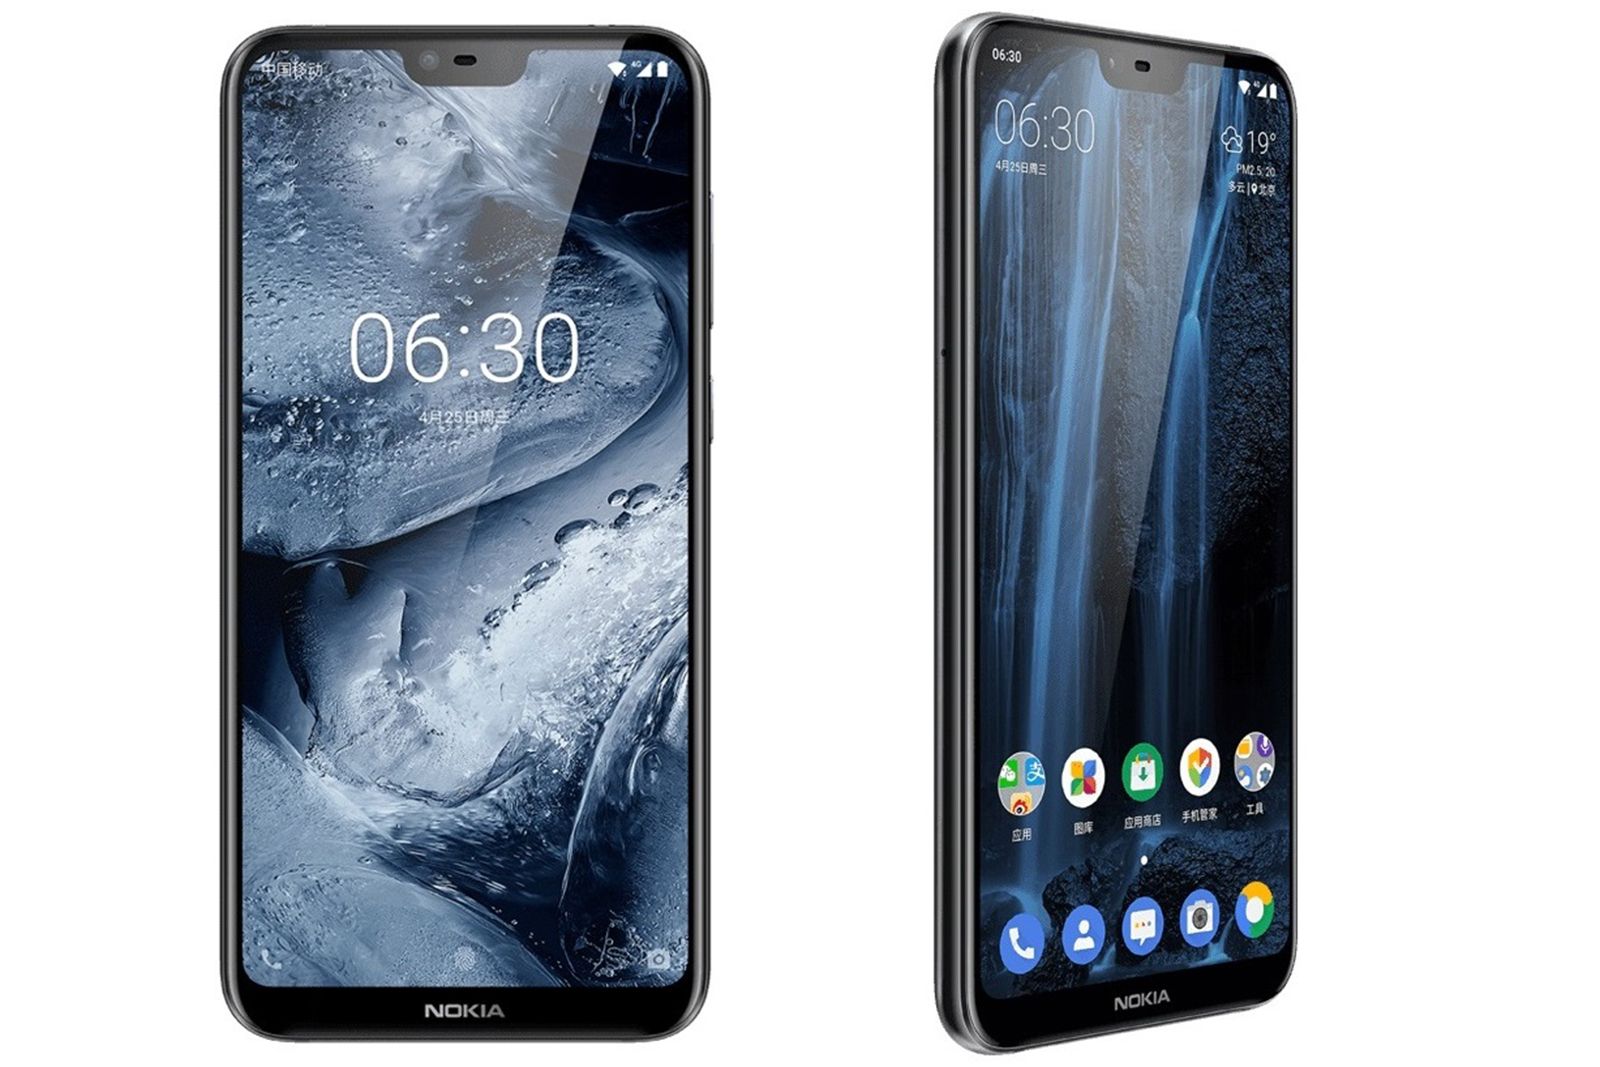 Nokia X6 official arrives with dual cameras and notch display image 1